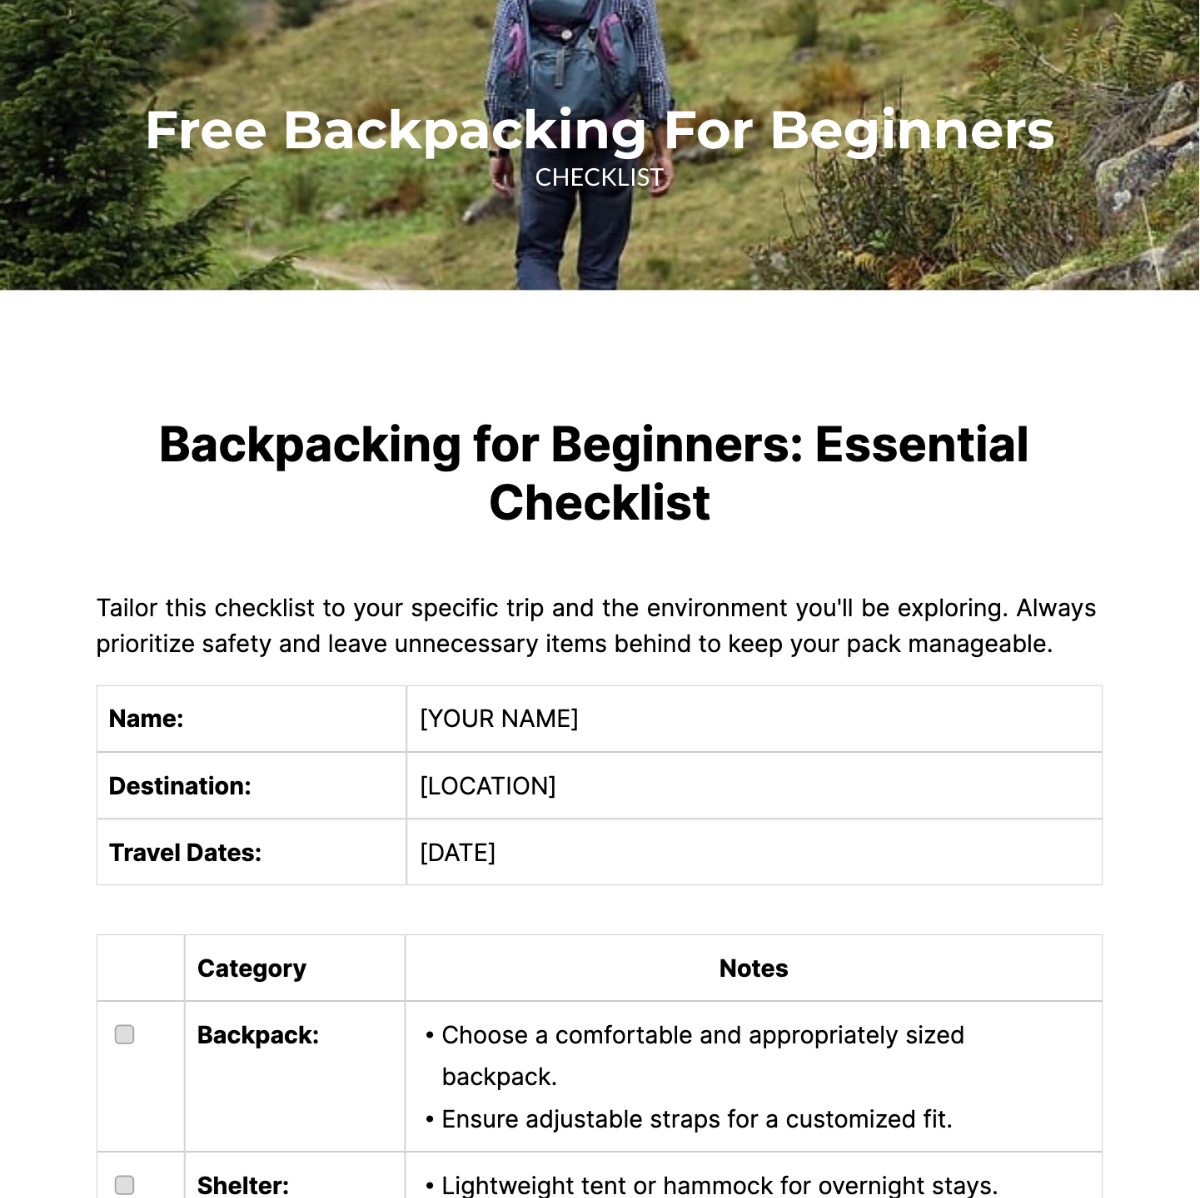 Free Backpacking For Beginners Checklist Template